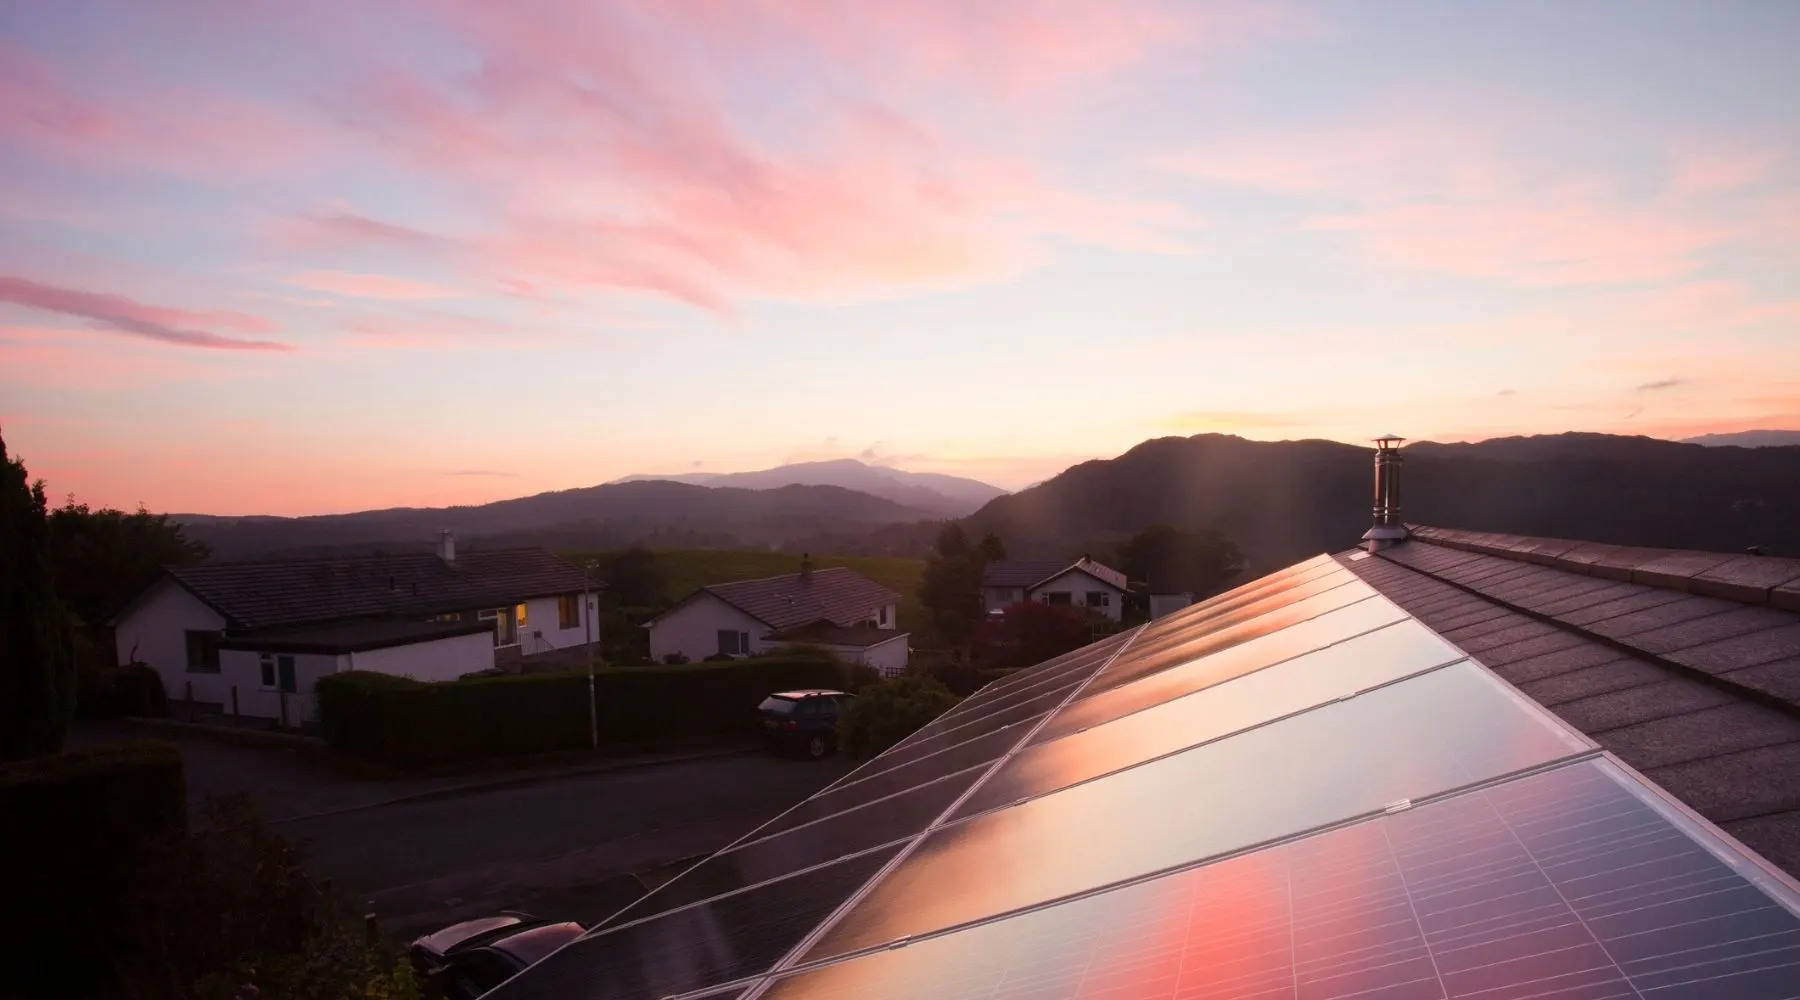 The sun sets over residential rooftop solar panels.